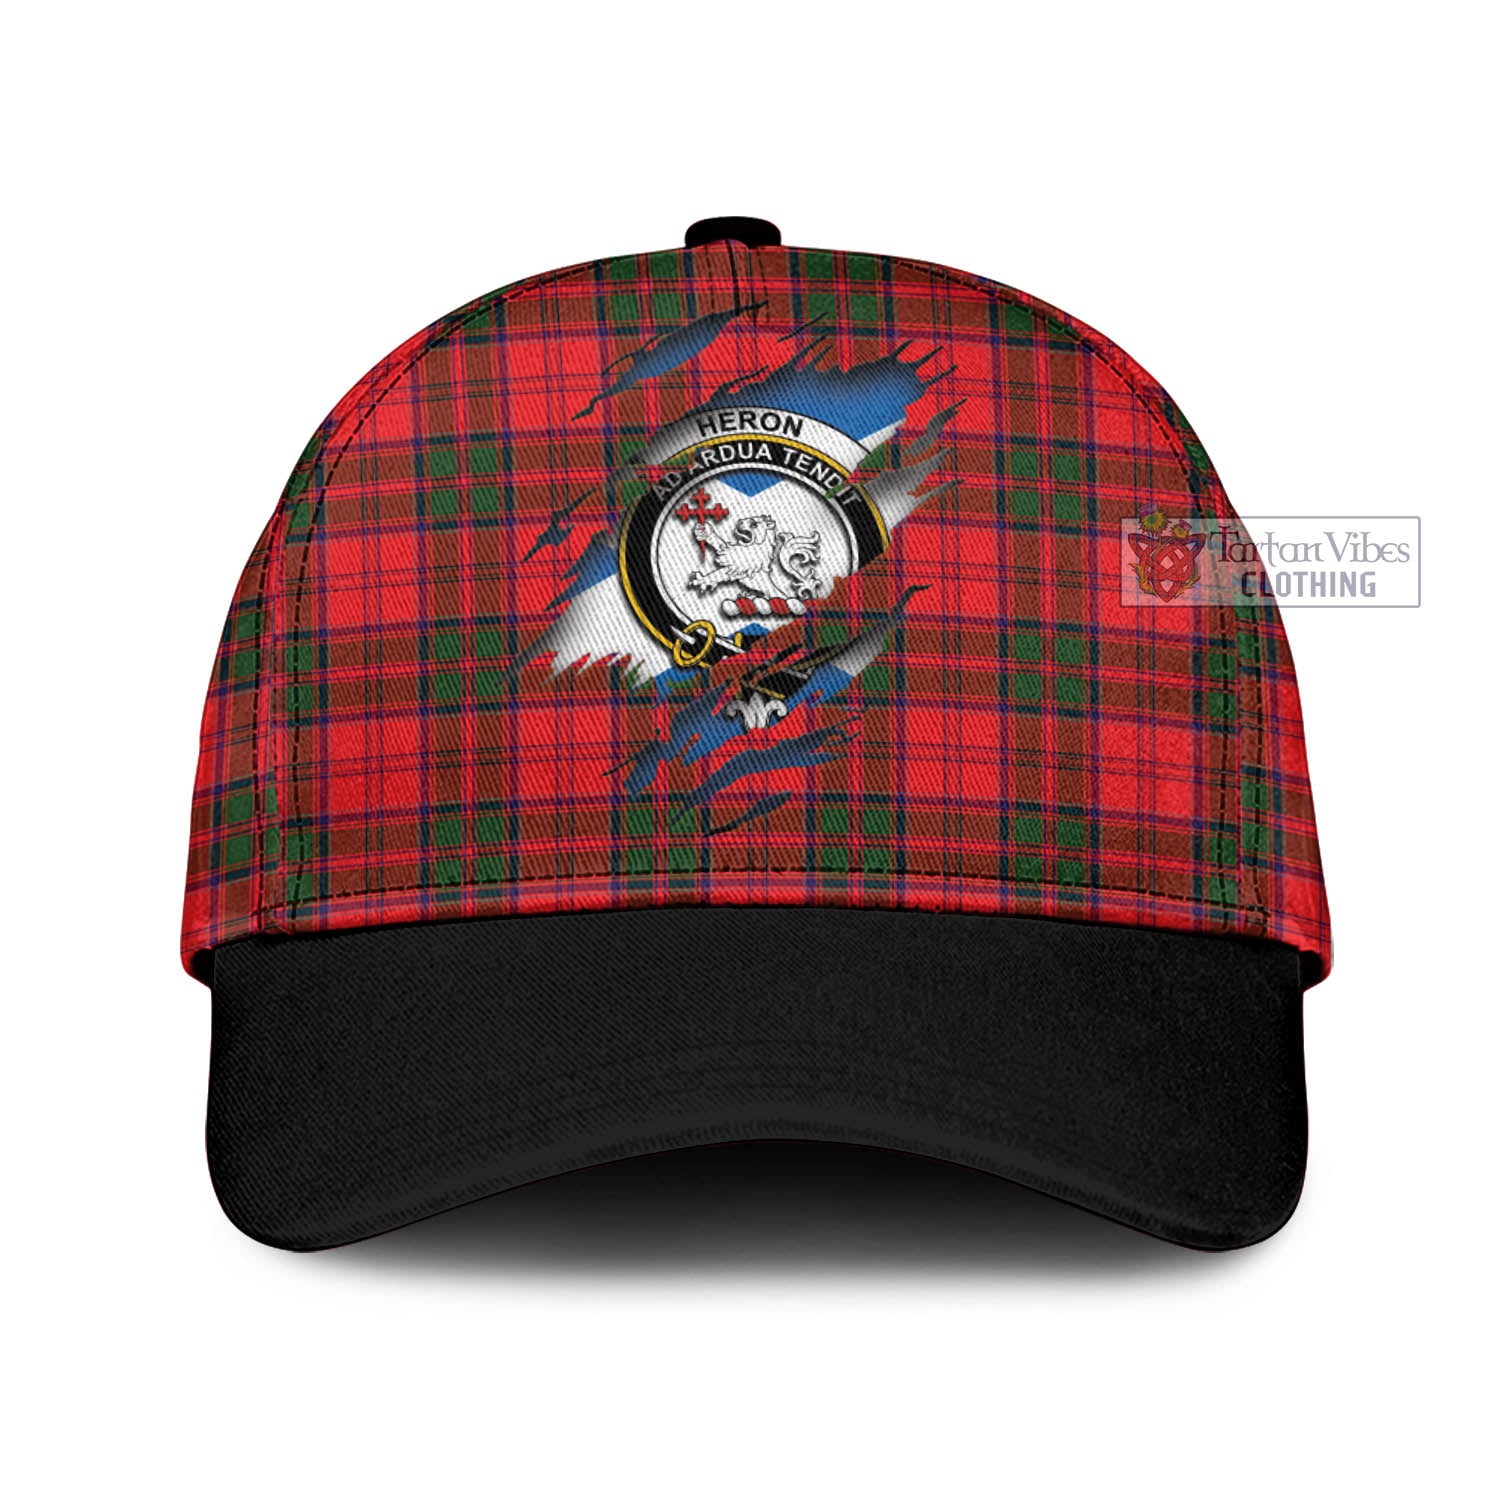 Tartan Vibes Clothing Heron Tartan Classic Cap with Family Crest In Me Style